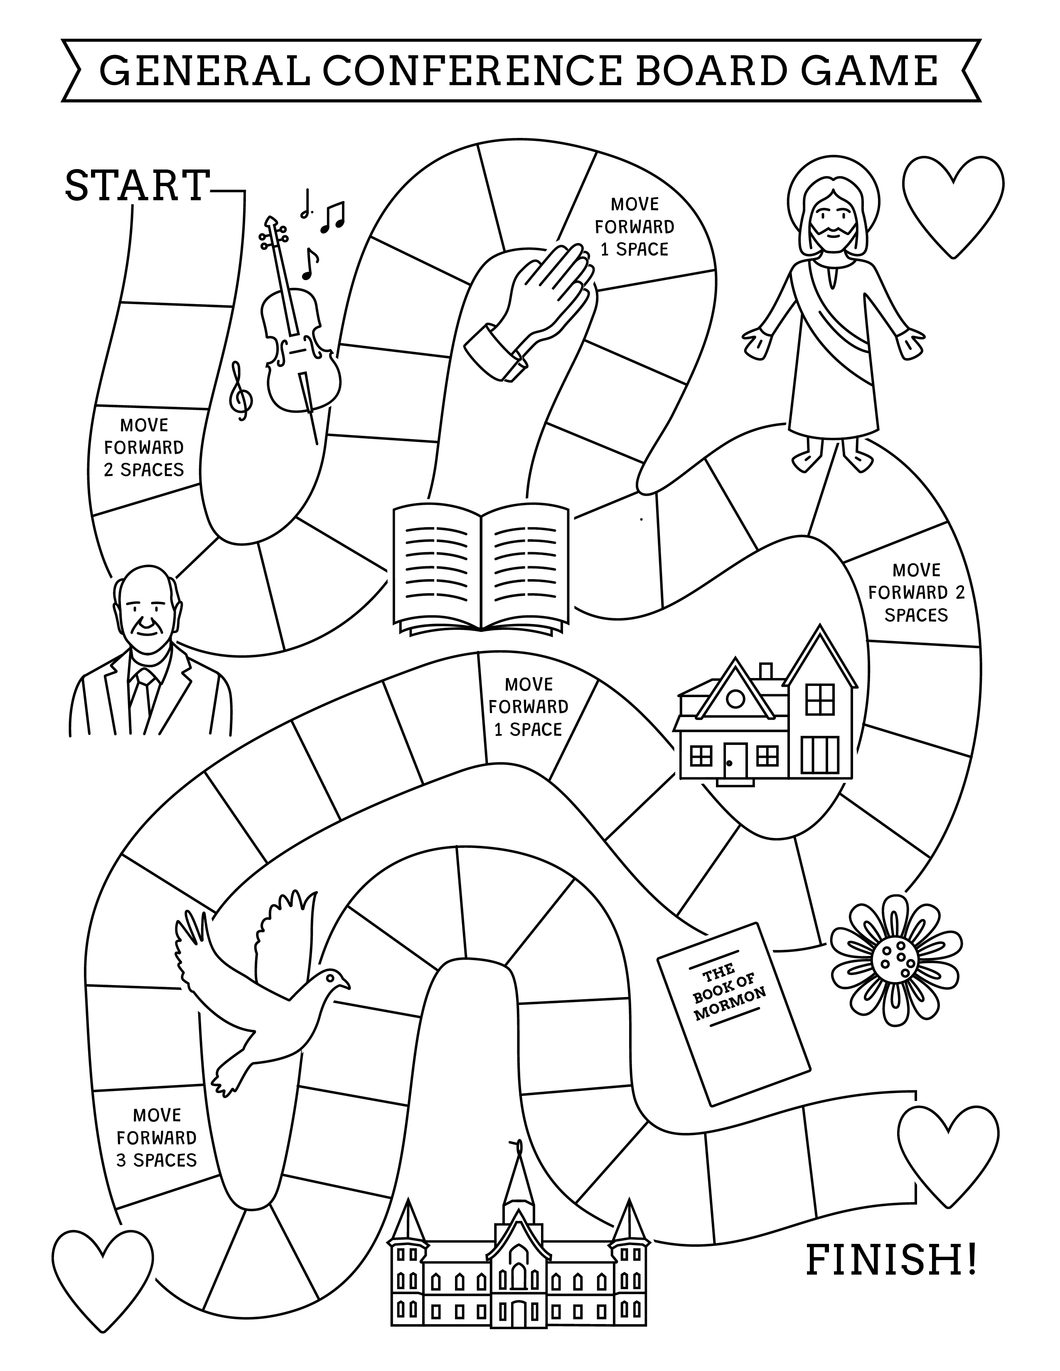 General Conference Board Game